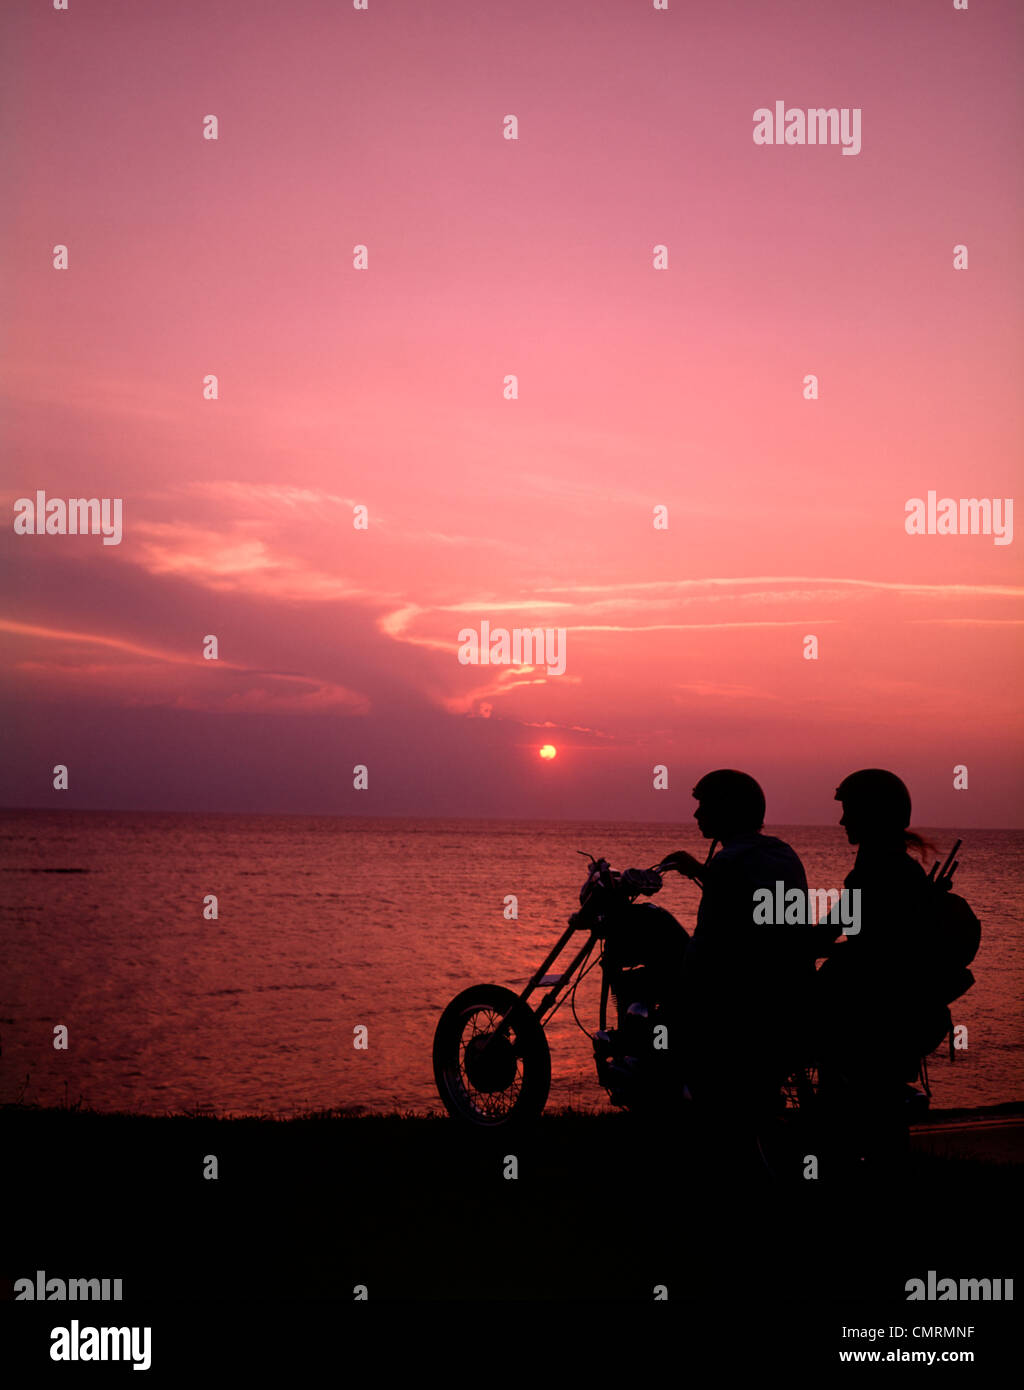 1970 1970s SILHOUETTED COUPLE SUNSET BEACH RIDING CHOPPER MOTORCYCLE BIKE MOTOR CYCLE MOTORCYCLES BIKERS BIKES Stock Photo